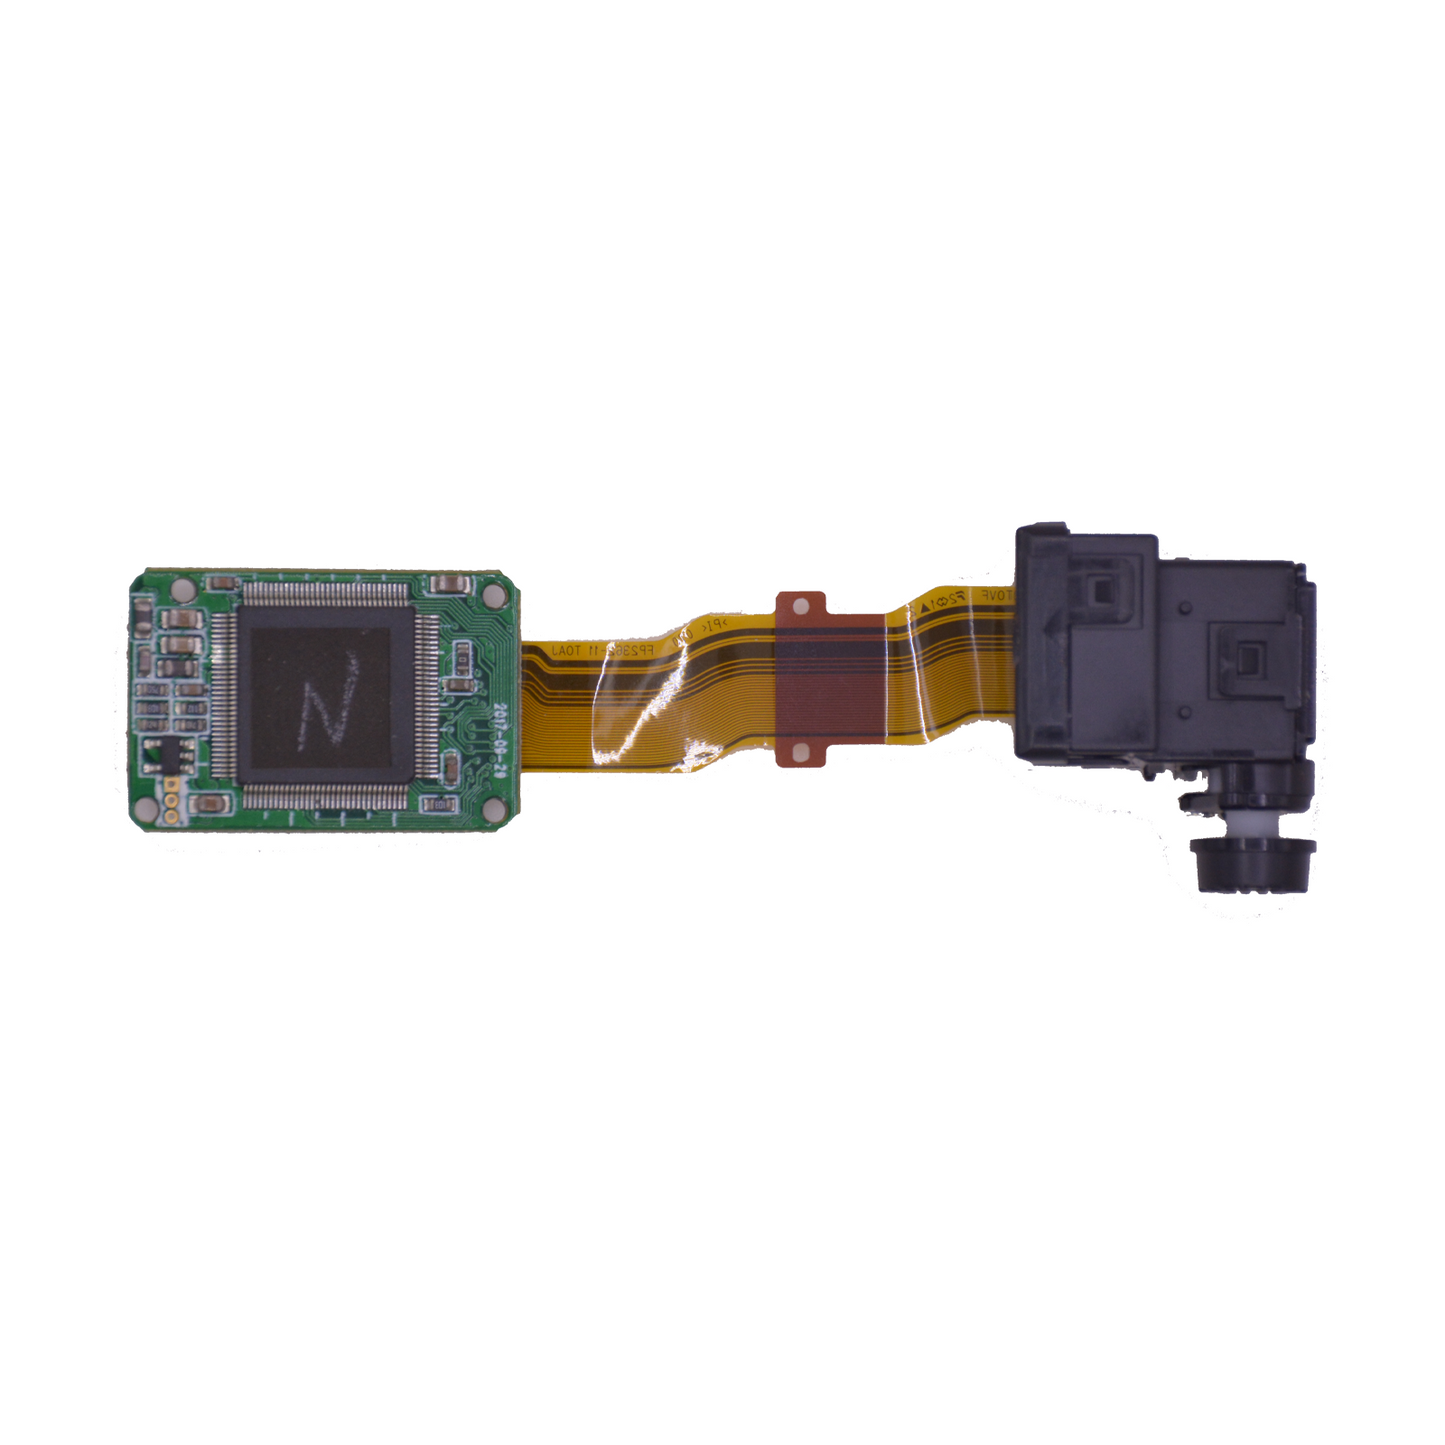 back view of Electrical viewfinder featuring a full-color ferroelectric LCD module